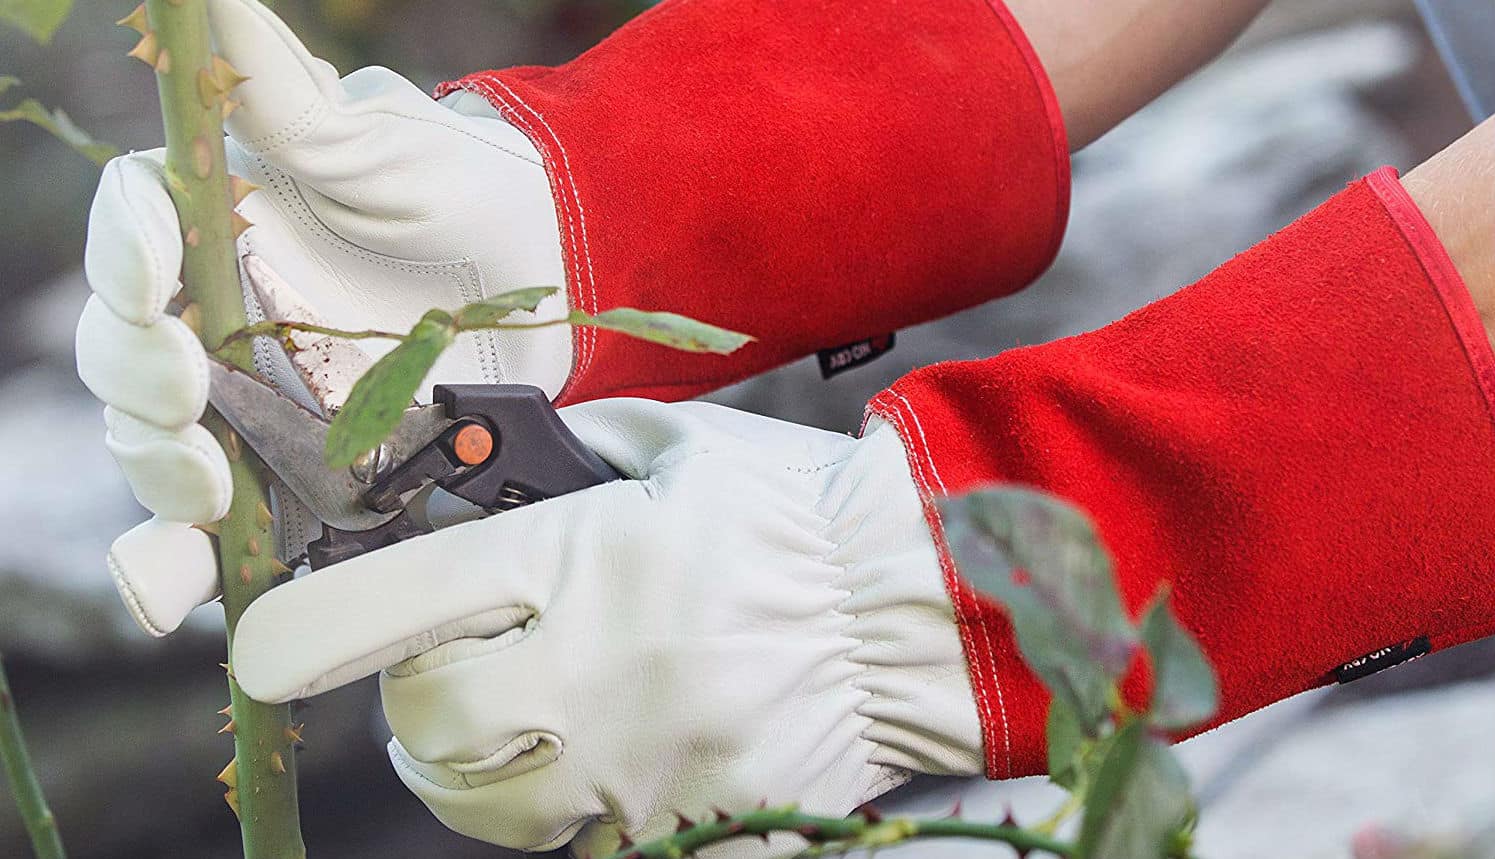 Best gloves for roses and brambles - We compare 5 great pairs and what to look for before buying